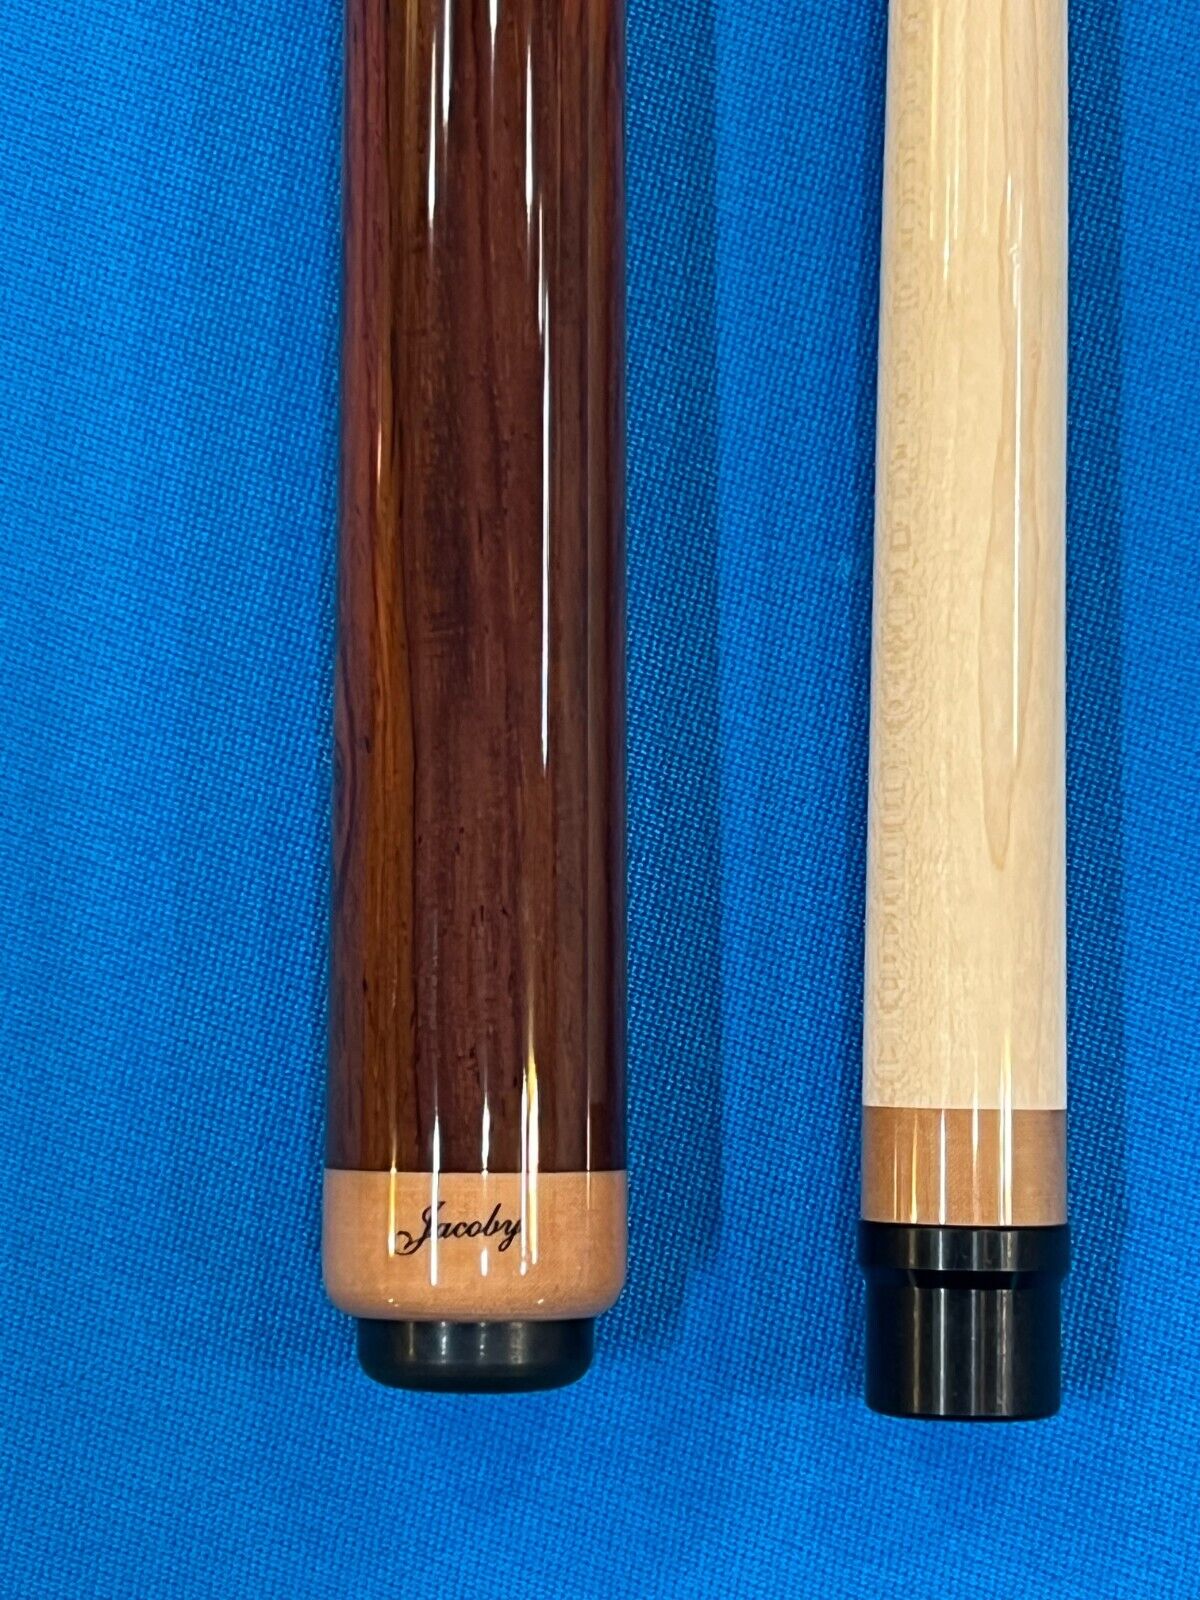 Jacoby Pool Cue  0609-40  13mm Shaft Wrapless Cocobolo